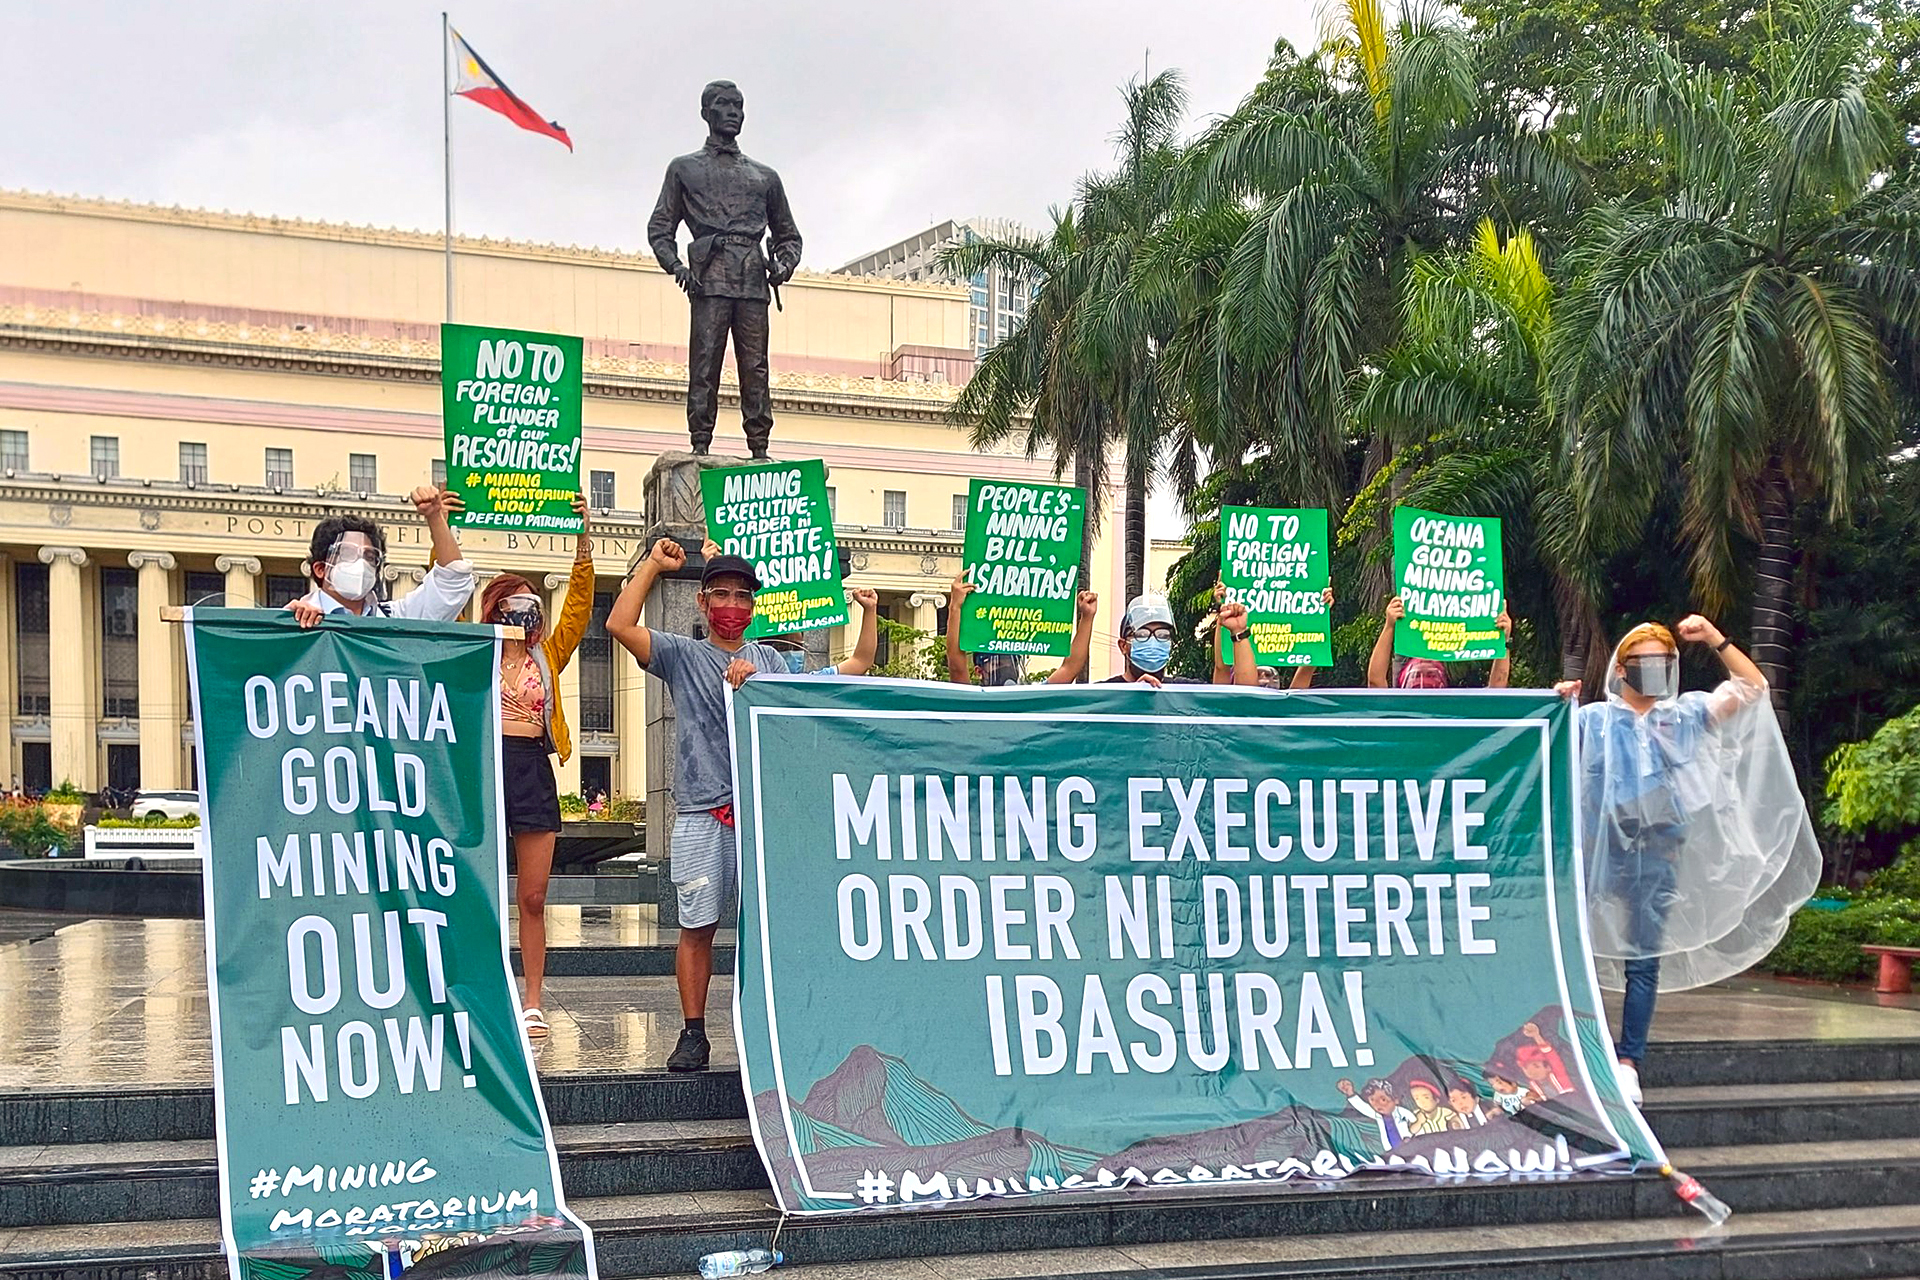 Earth Defenders unite in solidarity against catastrophic mining expansions